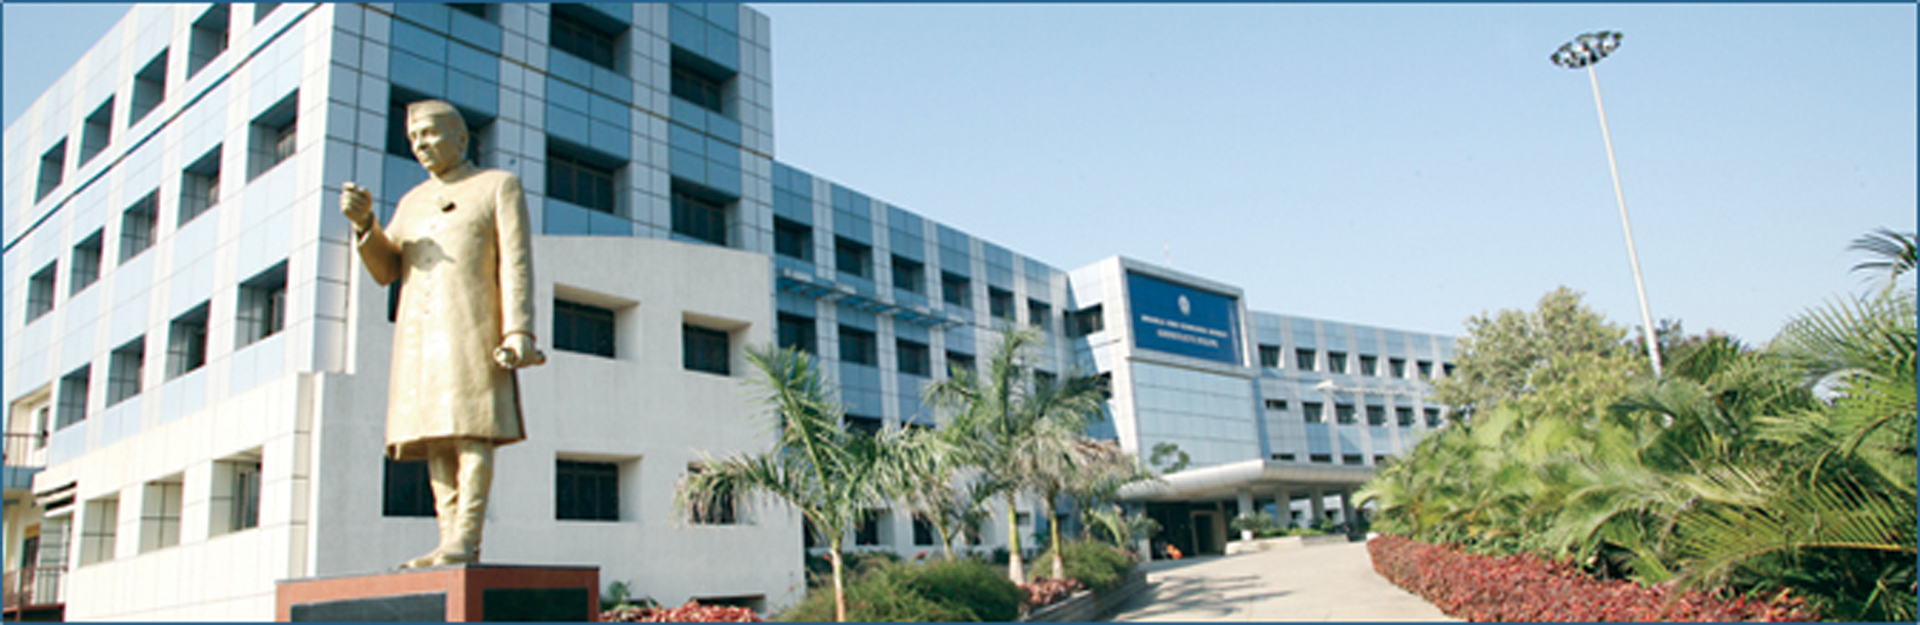 JNTUH Institute Of Science And Technology, Hyderabad Image